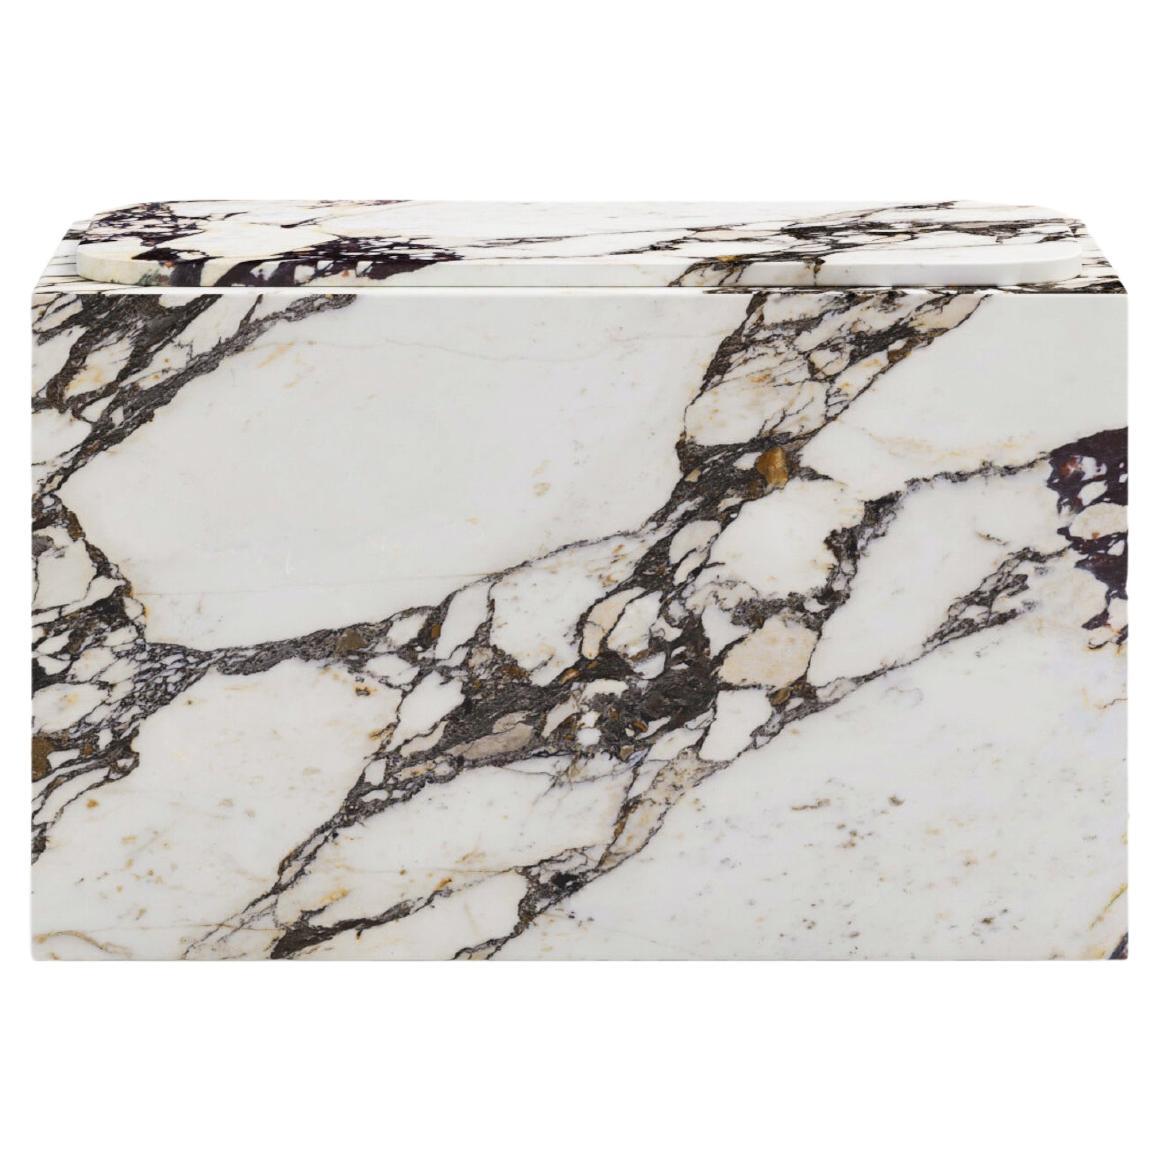 FORM(LA) Cubo Rectangle Side Table 30”L x 16"W x 19”H Calacatta Viola Marble For Sale